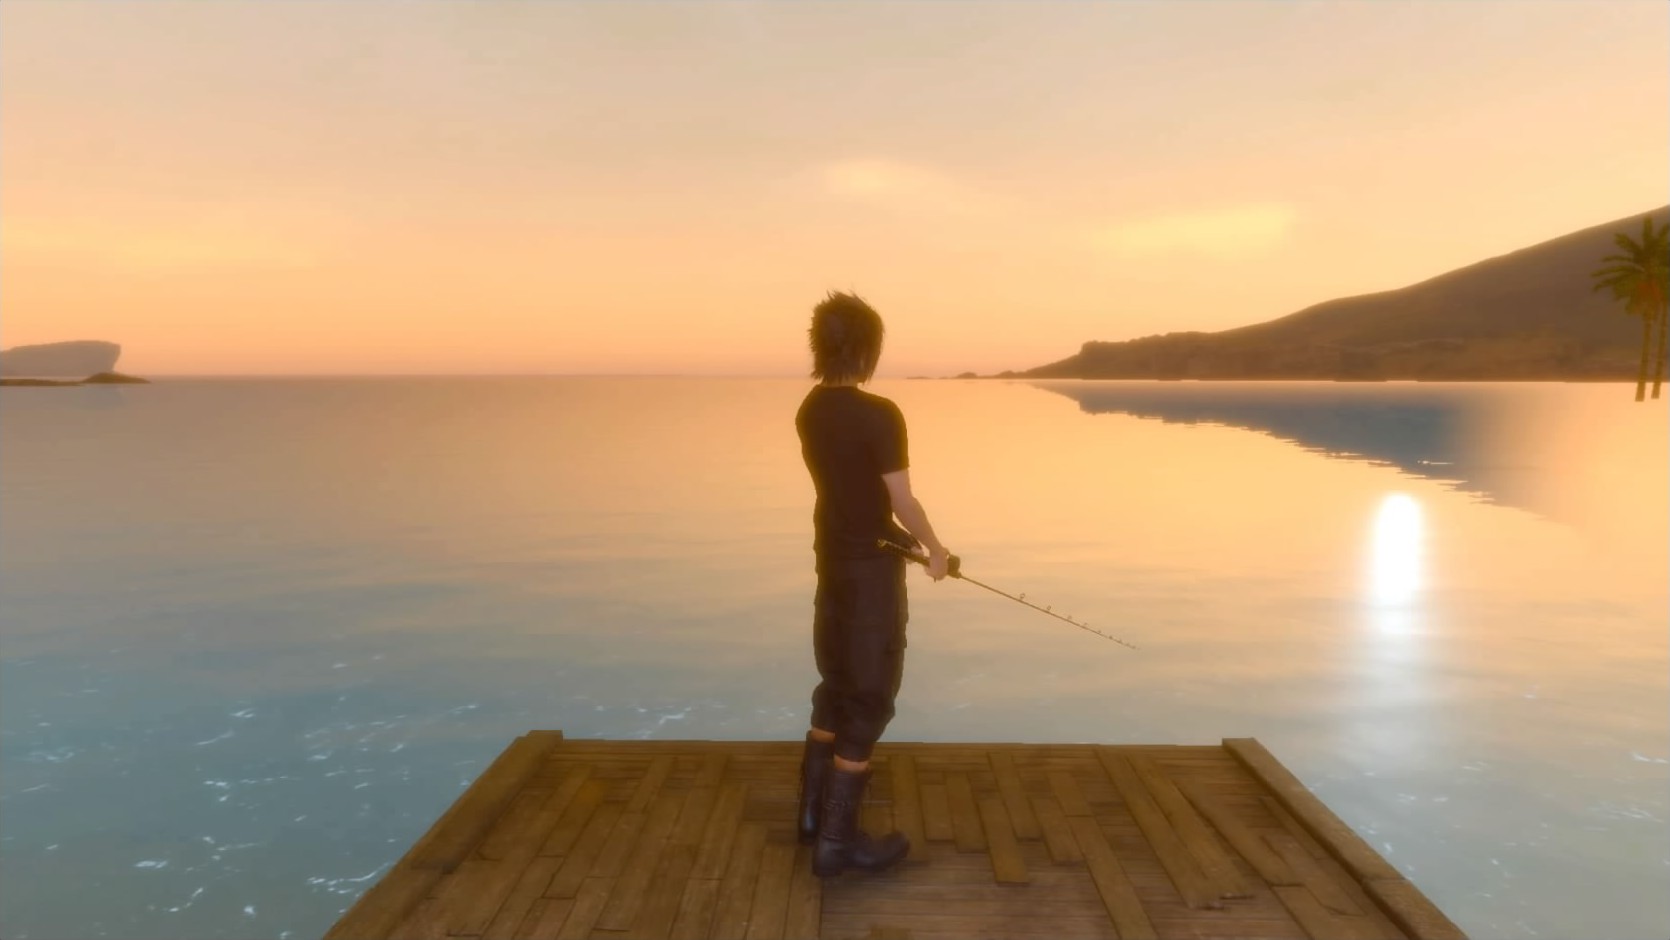 Why Is There So Much Fishing in Video Games?